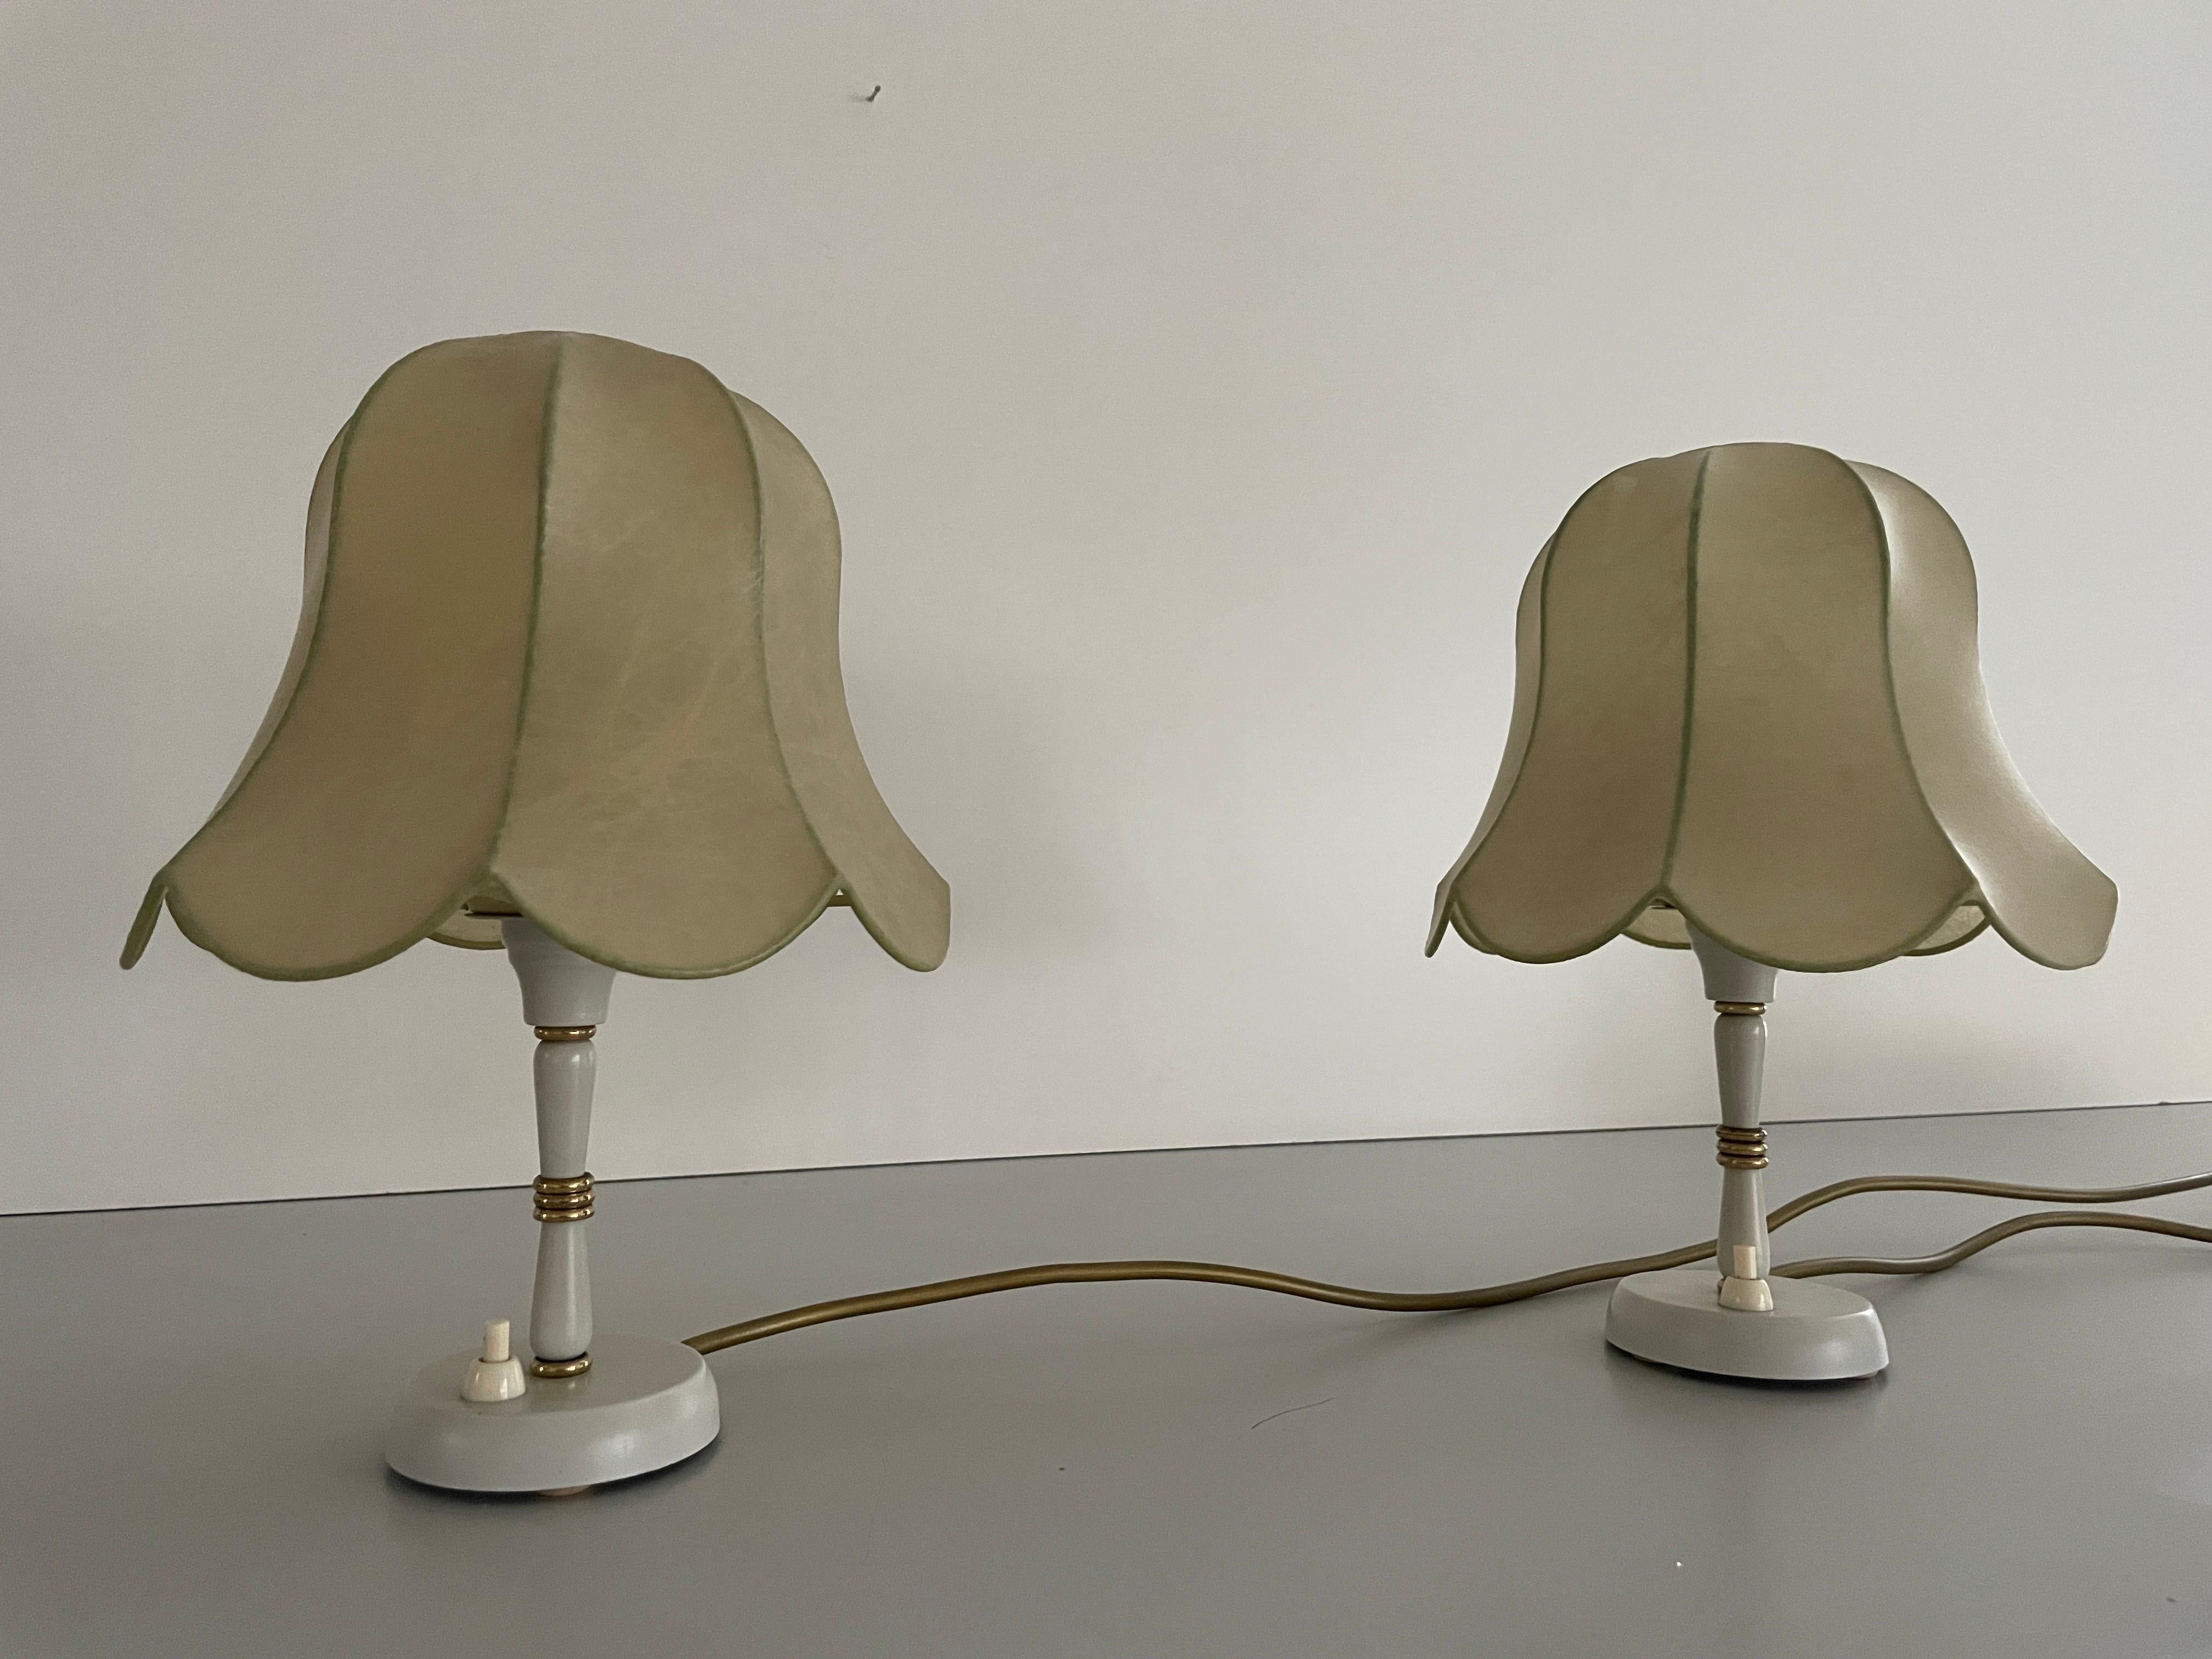 Space Age Cocoon Shade Metal Body Pair of Bedside Lamps by GOLDKANT, 1970s, Germany For Sale